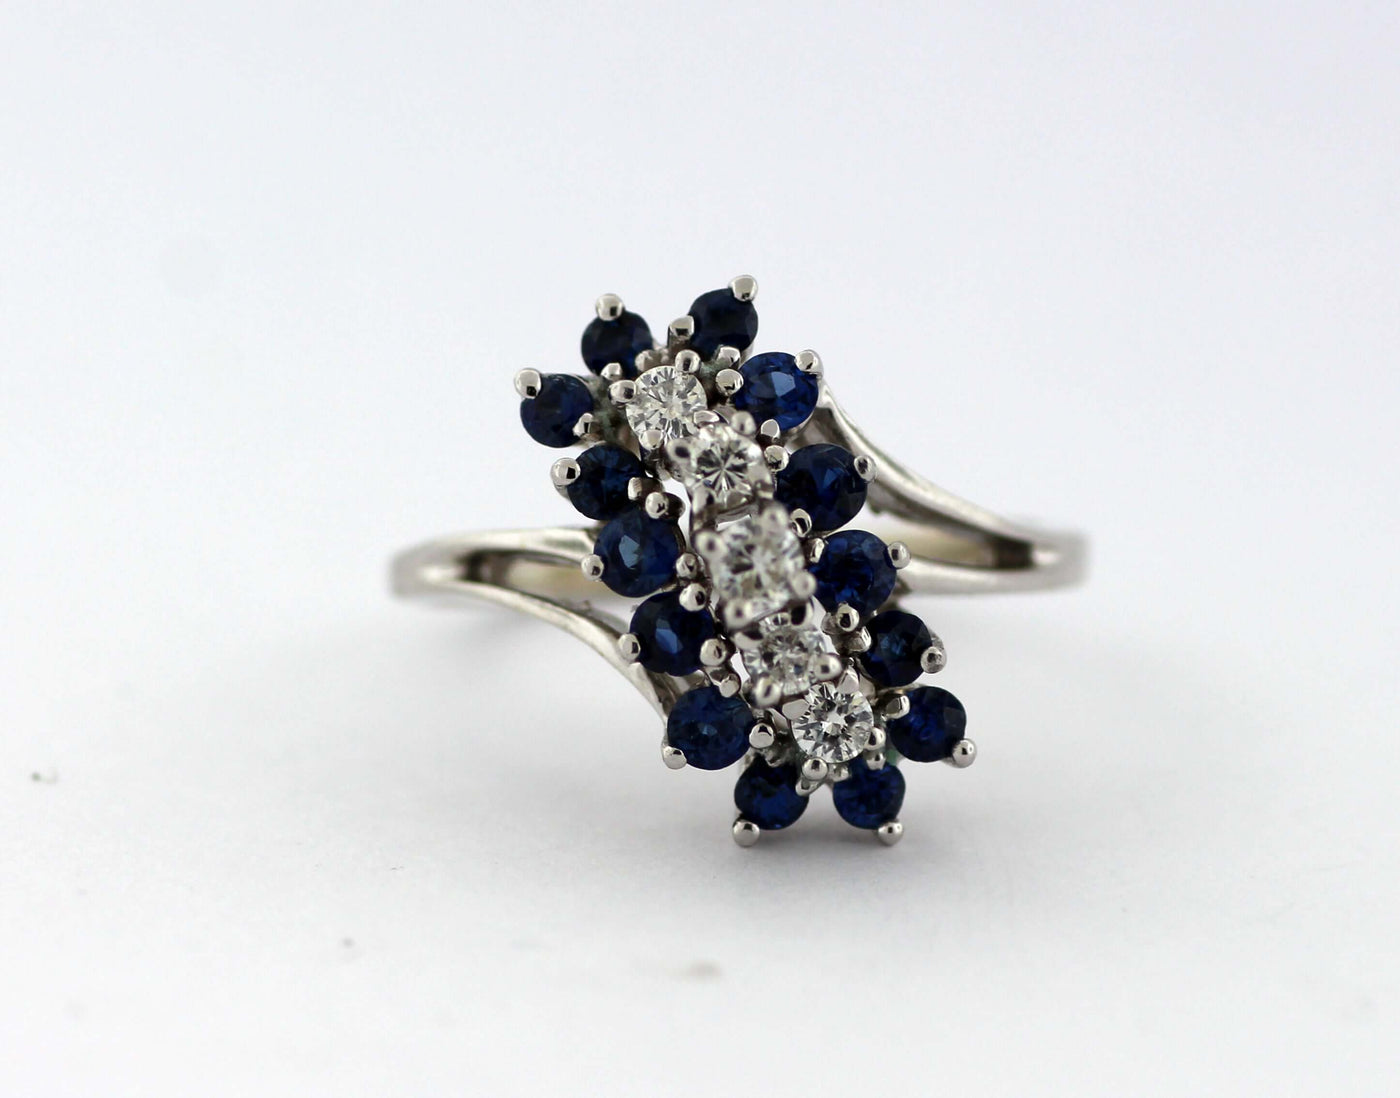 14KY .70 CTTW SAPPHIRE AND DIAMOND RING .31 CTTW H-SI2